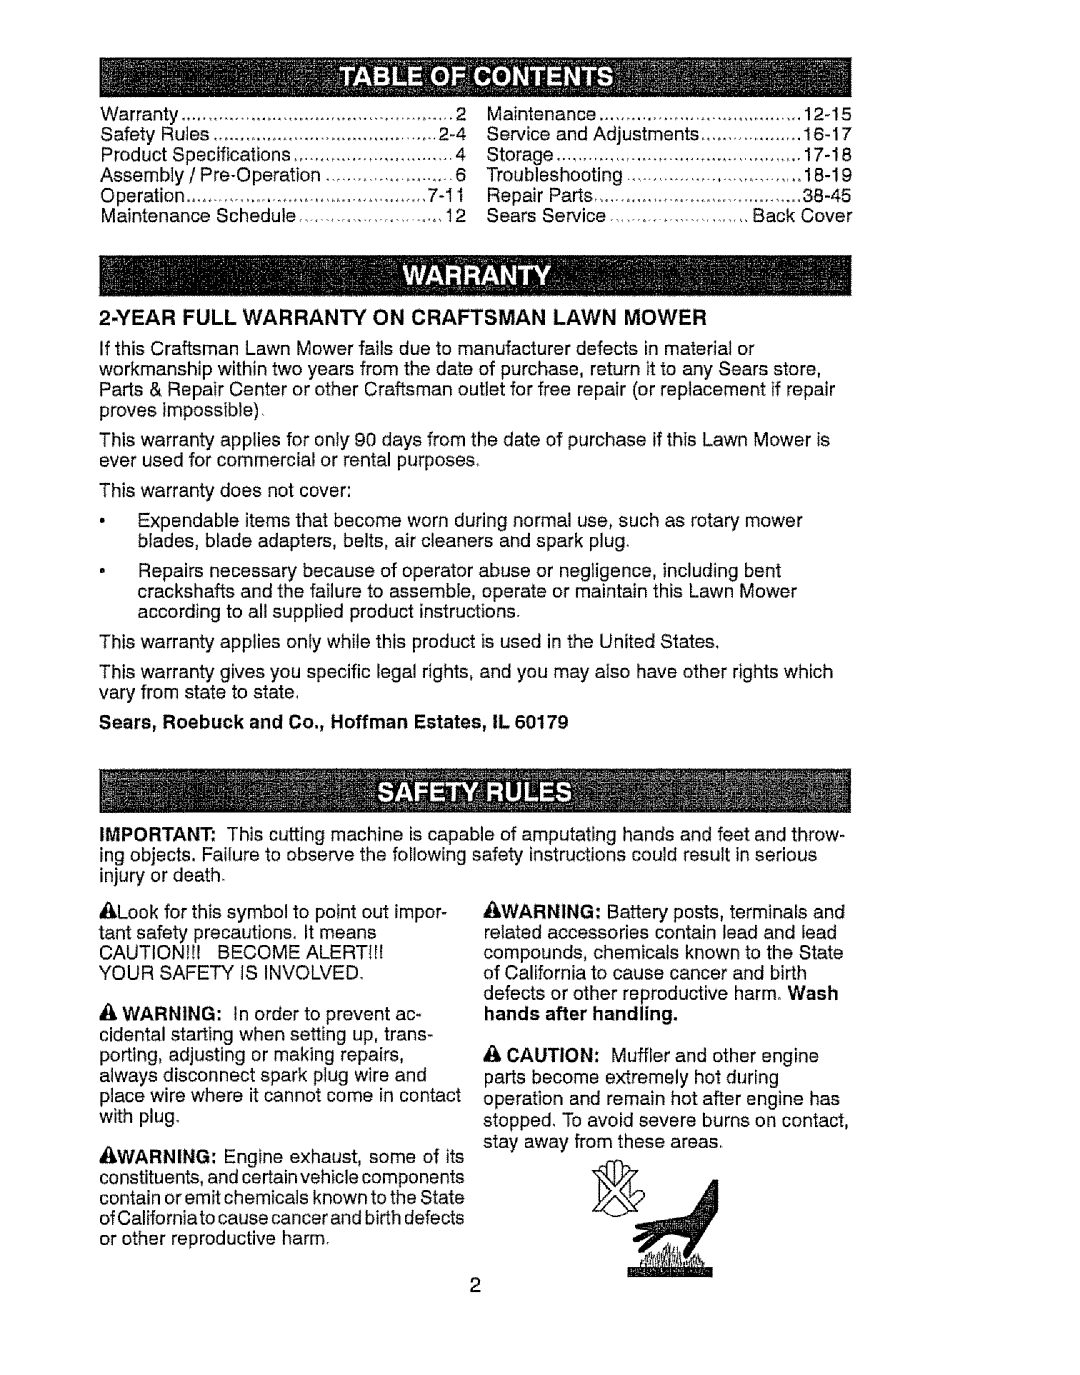 Craftsman 917.37646 owner manual Yearfull Warranty On Craftsman Lawn Mower, Sears, Roebuck and Co., Hoffman Estates, IL 